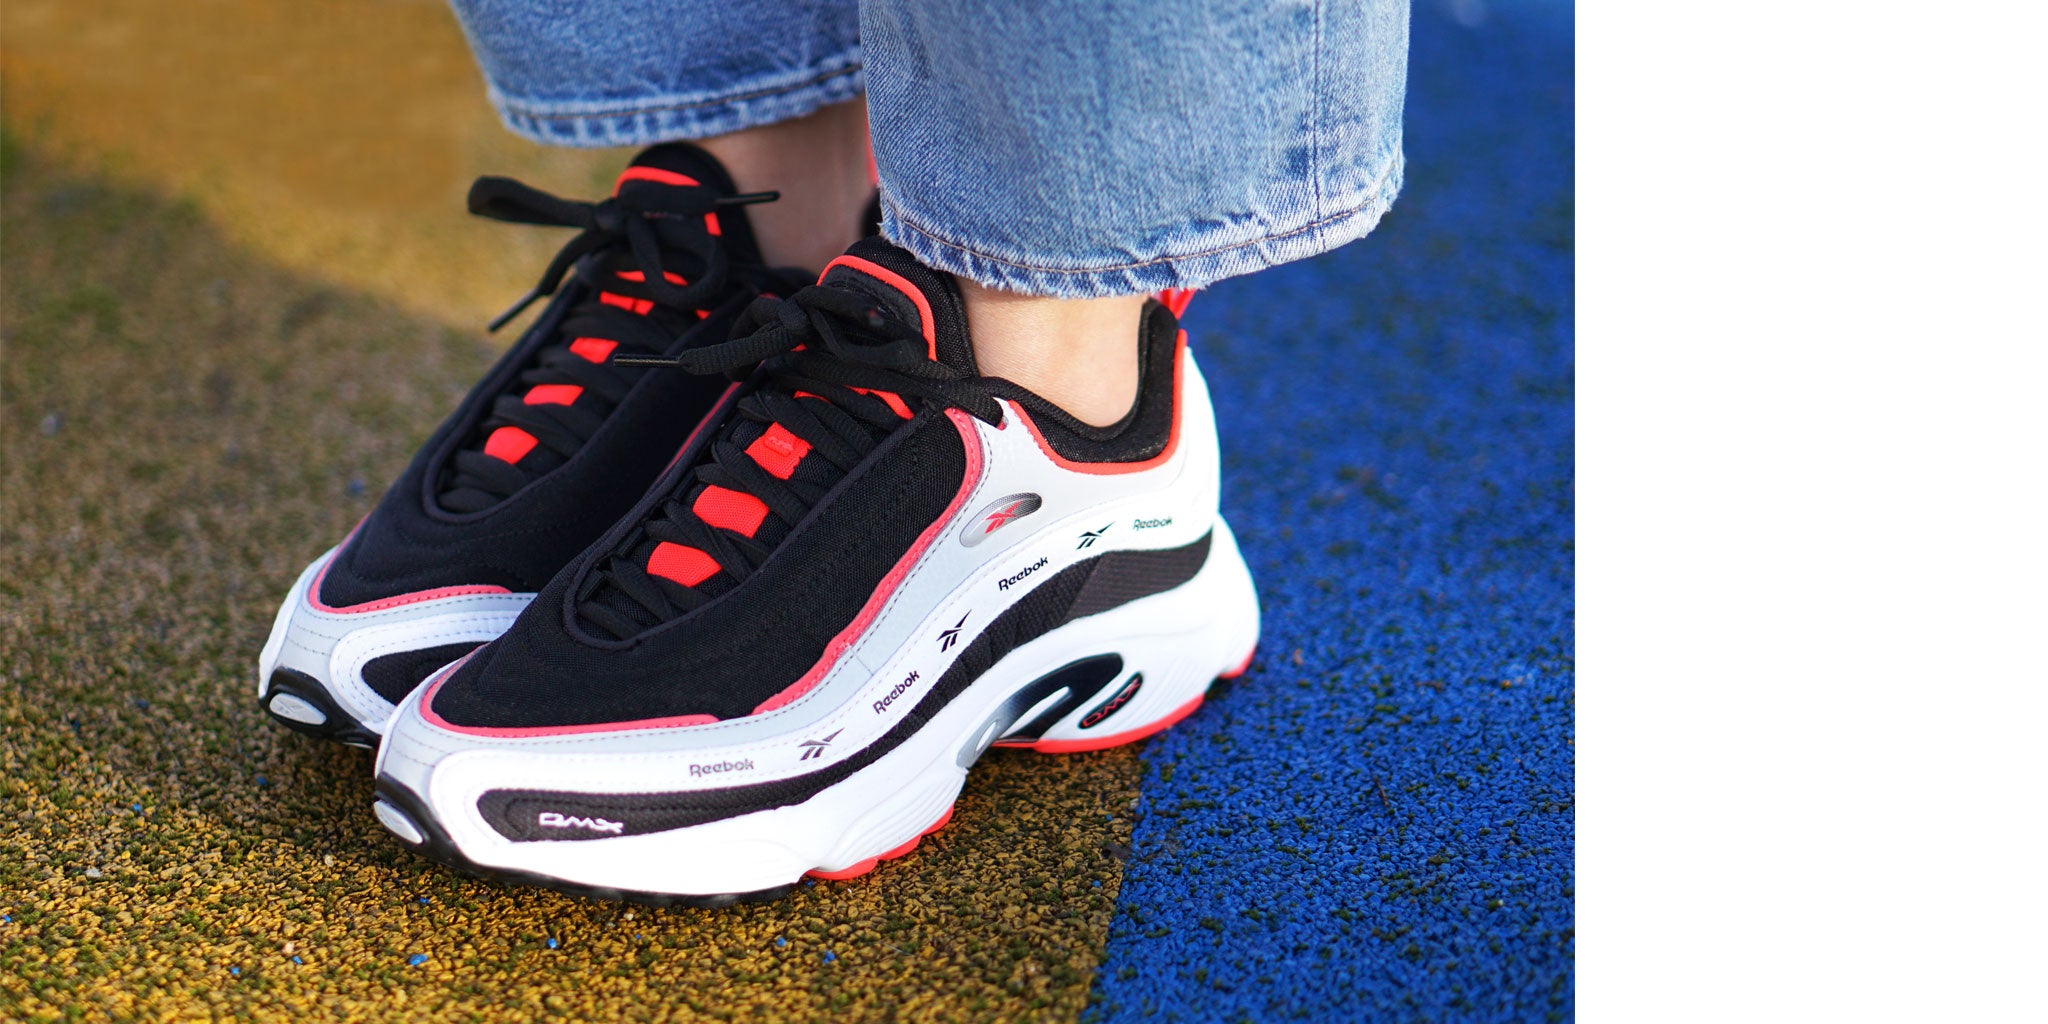 feature: the Reebok Daytona DMX Vector is available Pam Womenswear